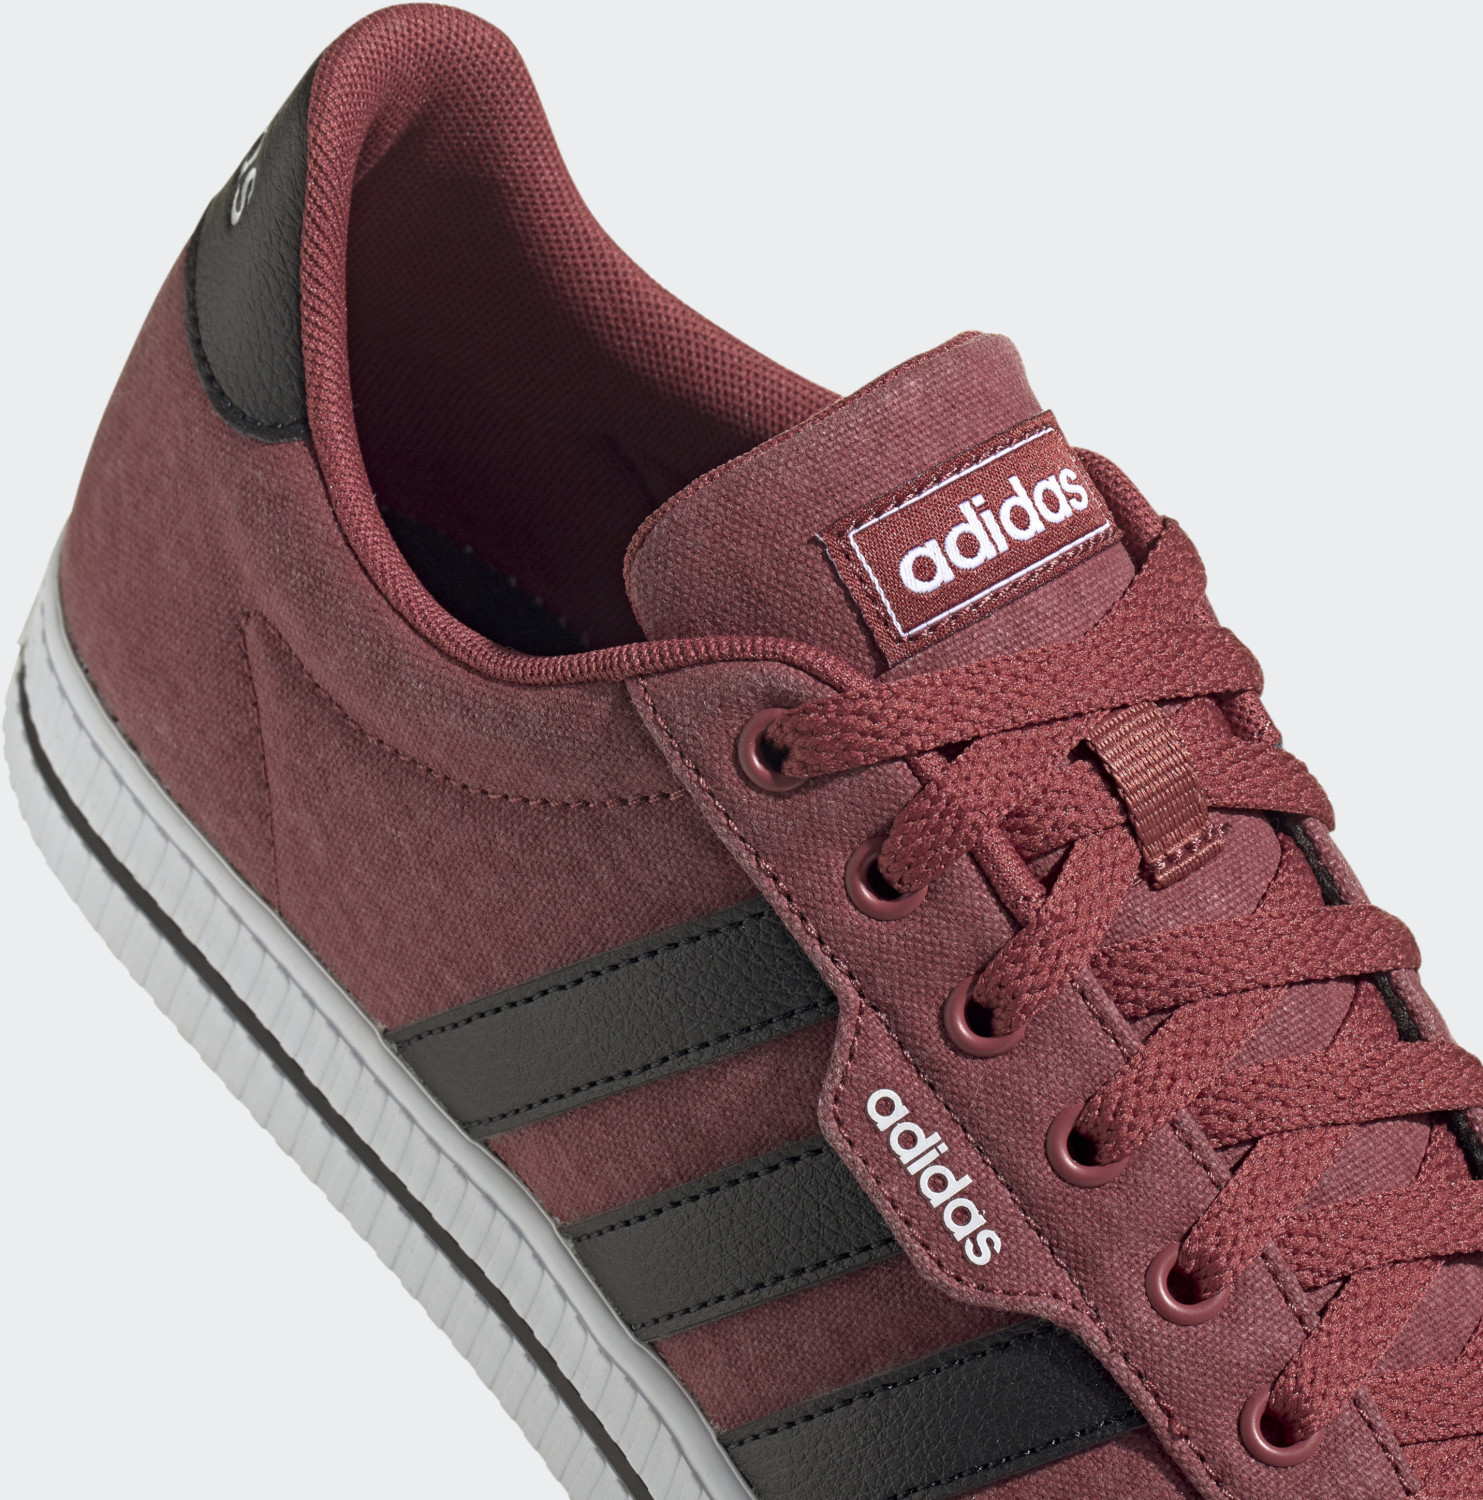 Adidas daily 3.0. Adidas Daily 3.0 Black. Adidas Daily 3.0 Shoes. Adidas Daily 2.0 men Red.